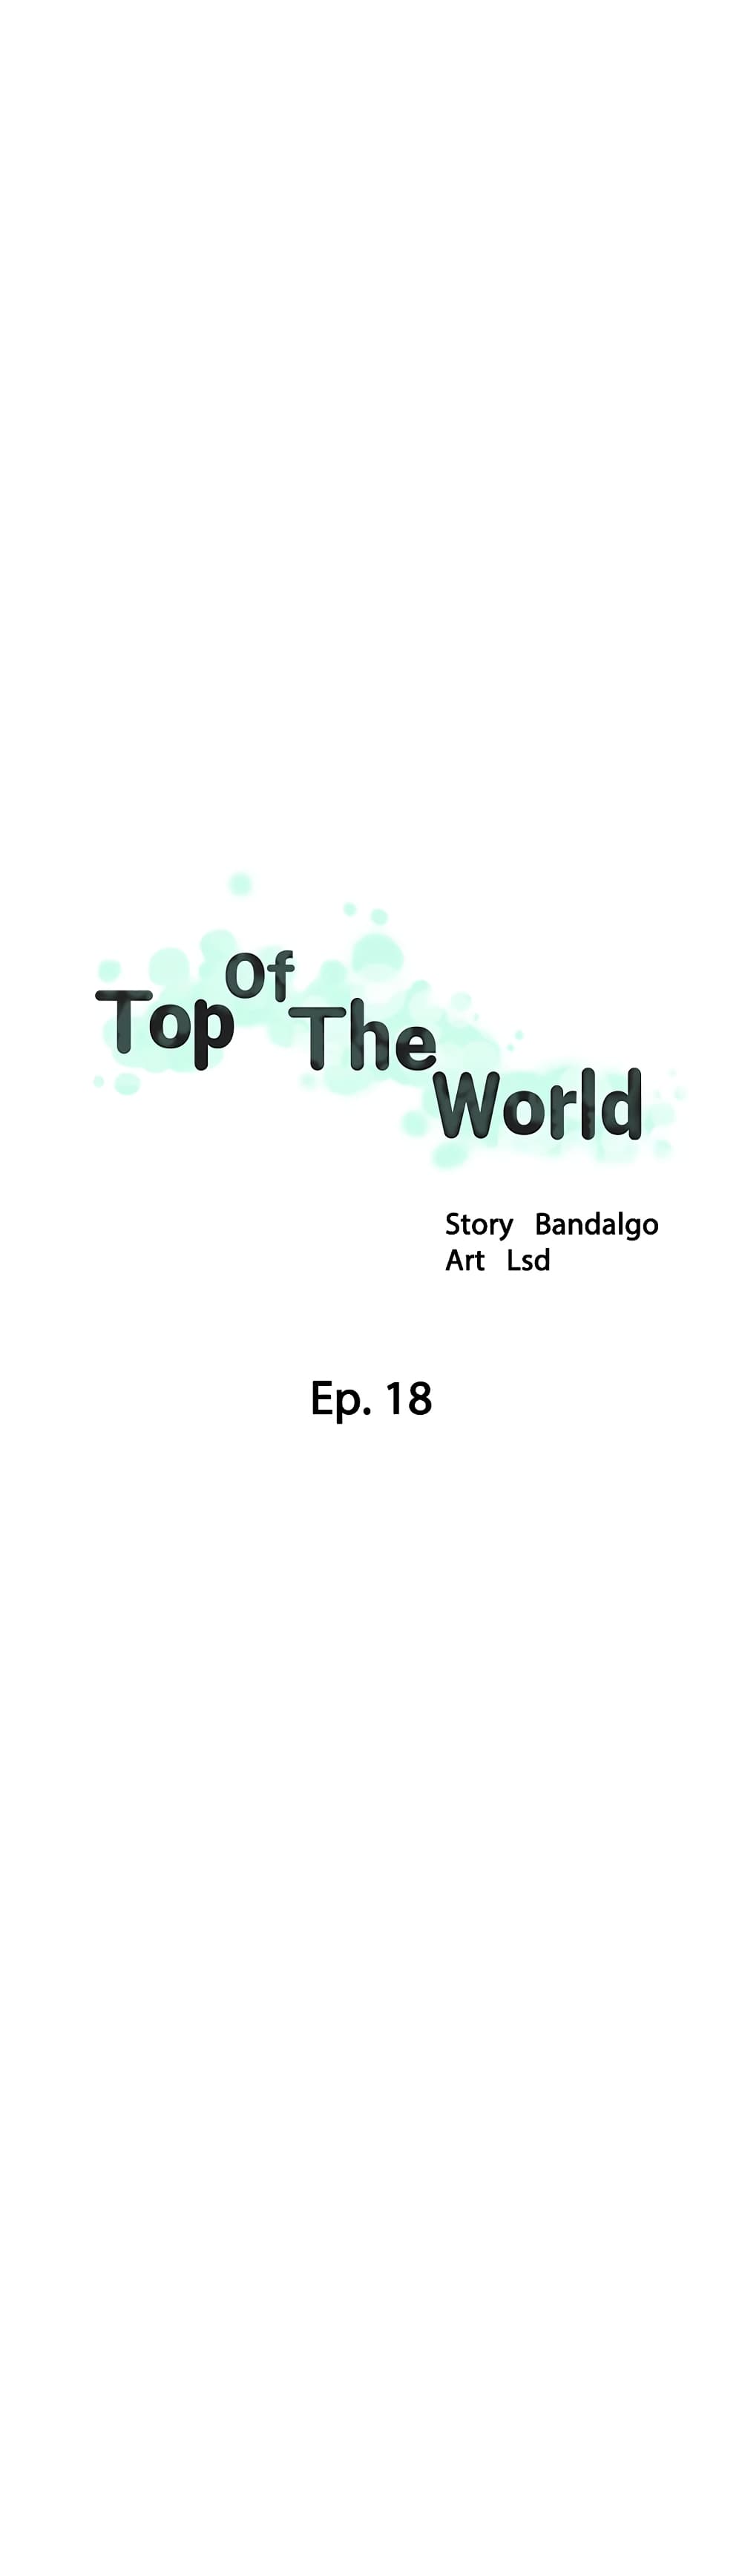 Top Of The World 18-18